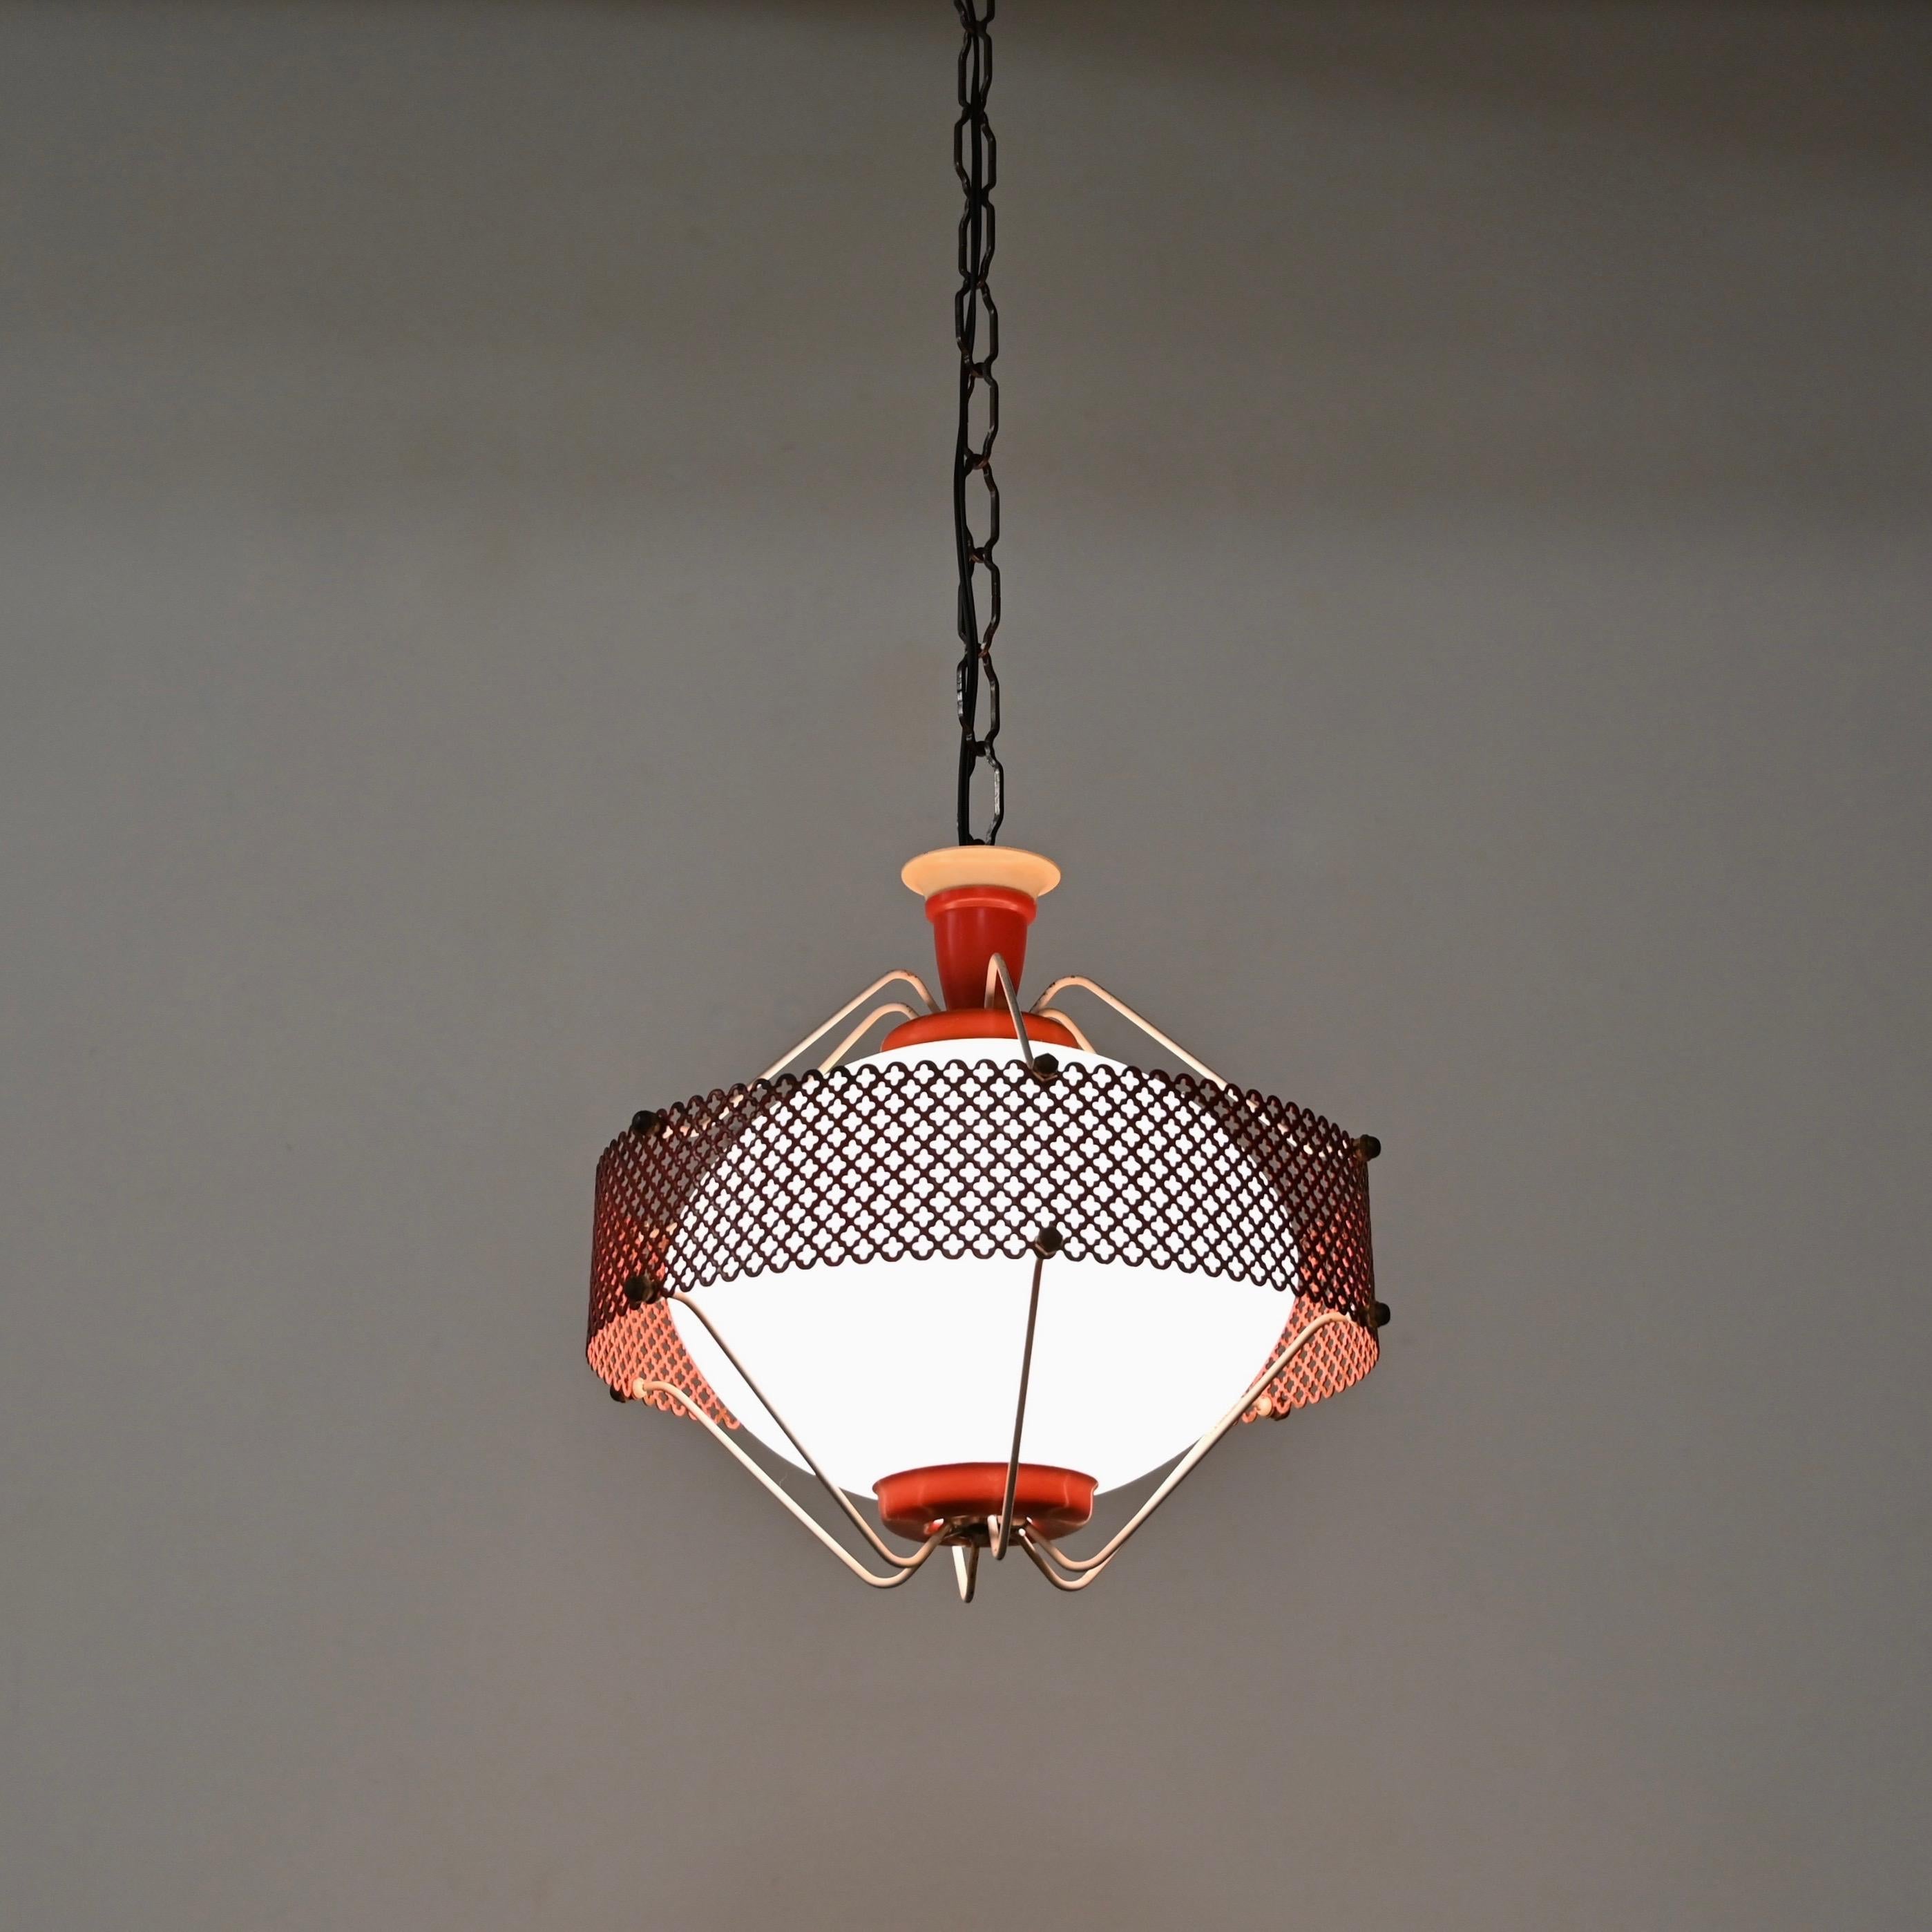 Mathieu Matégot Pendant Lamps in Opal Glass, Red Metal, 1950s French Lighting For Sale 8